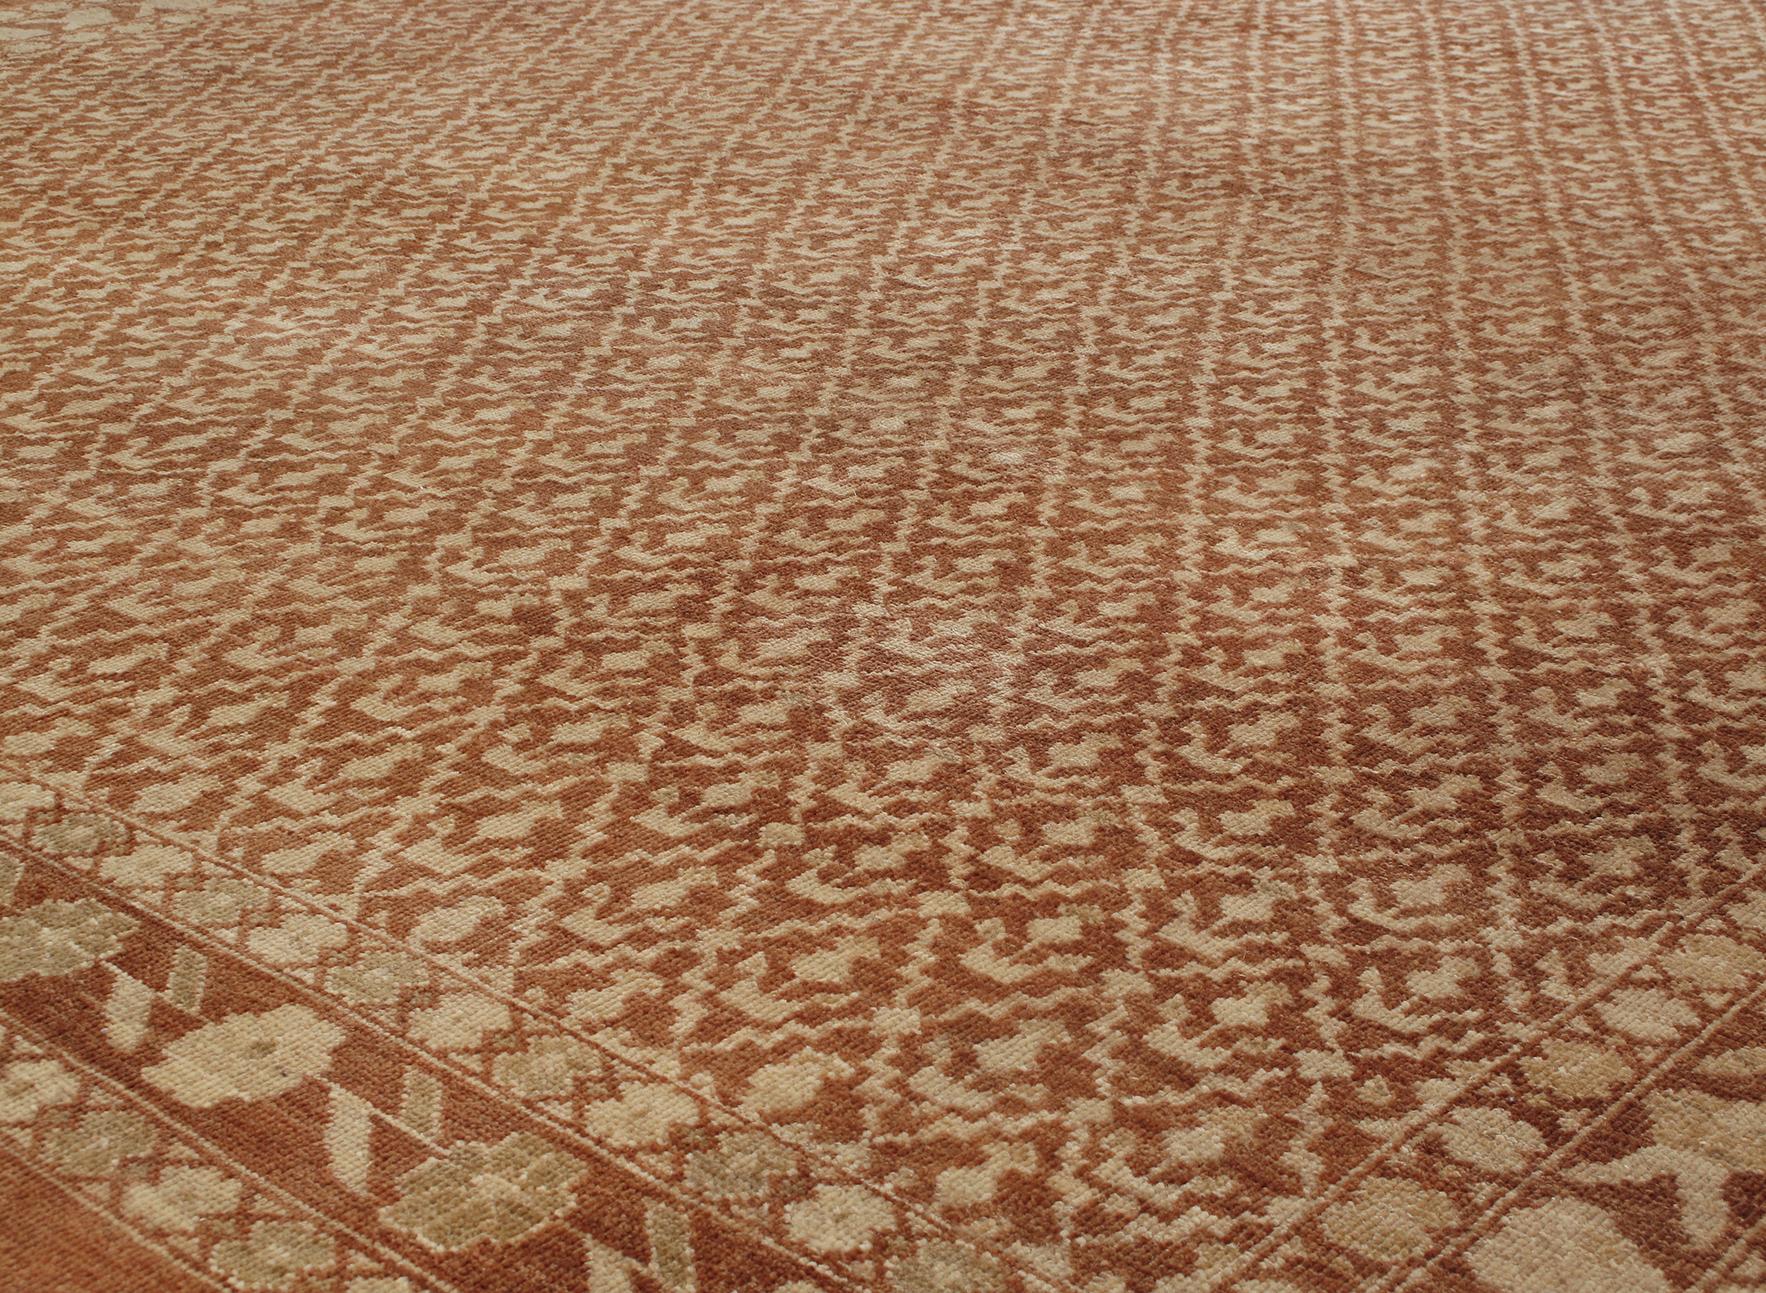 This Bakshaish rug is styled after the rare and collectible antique Camelhair Bakshaish rugs that were produced in the 19th century and earlier. Due to their limited availability, NASIRI revived the ancient dyeing and weaving techniques that had